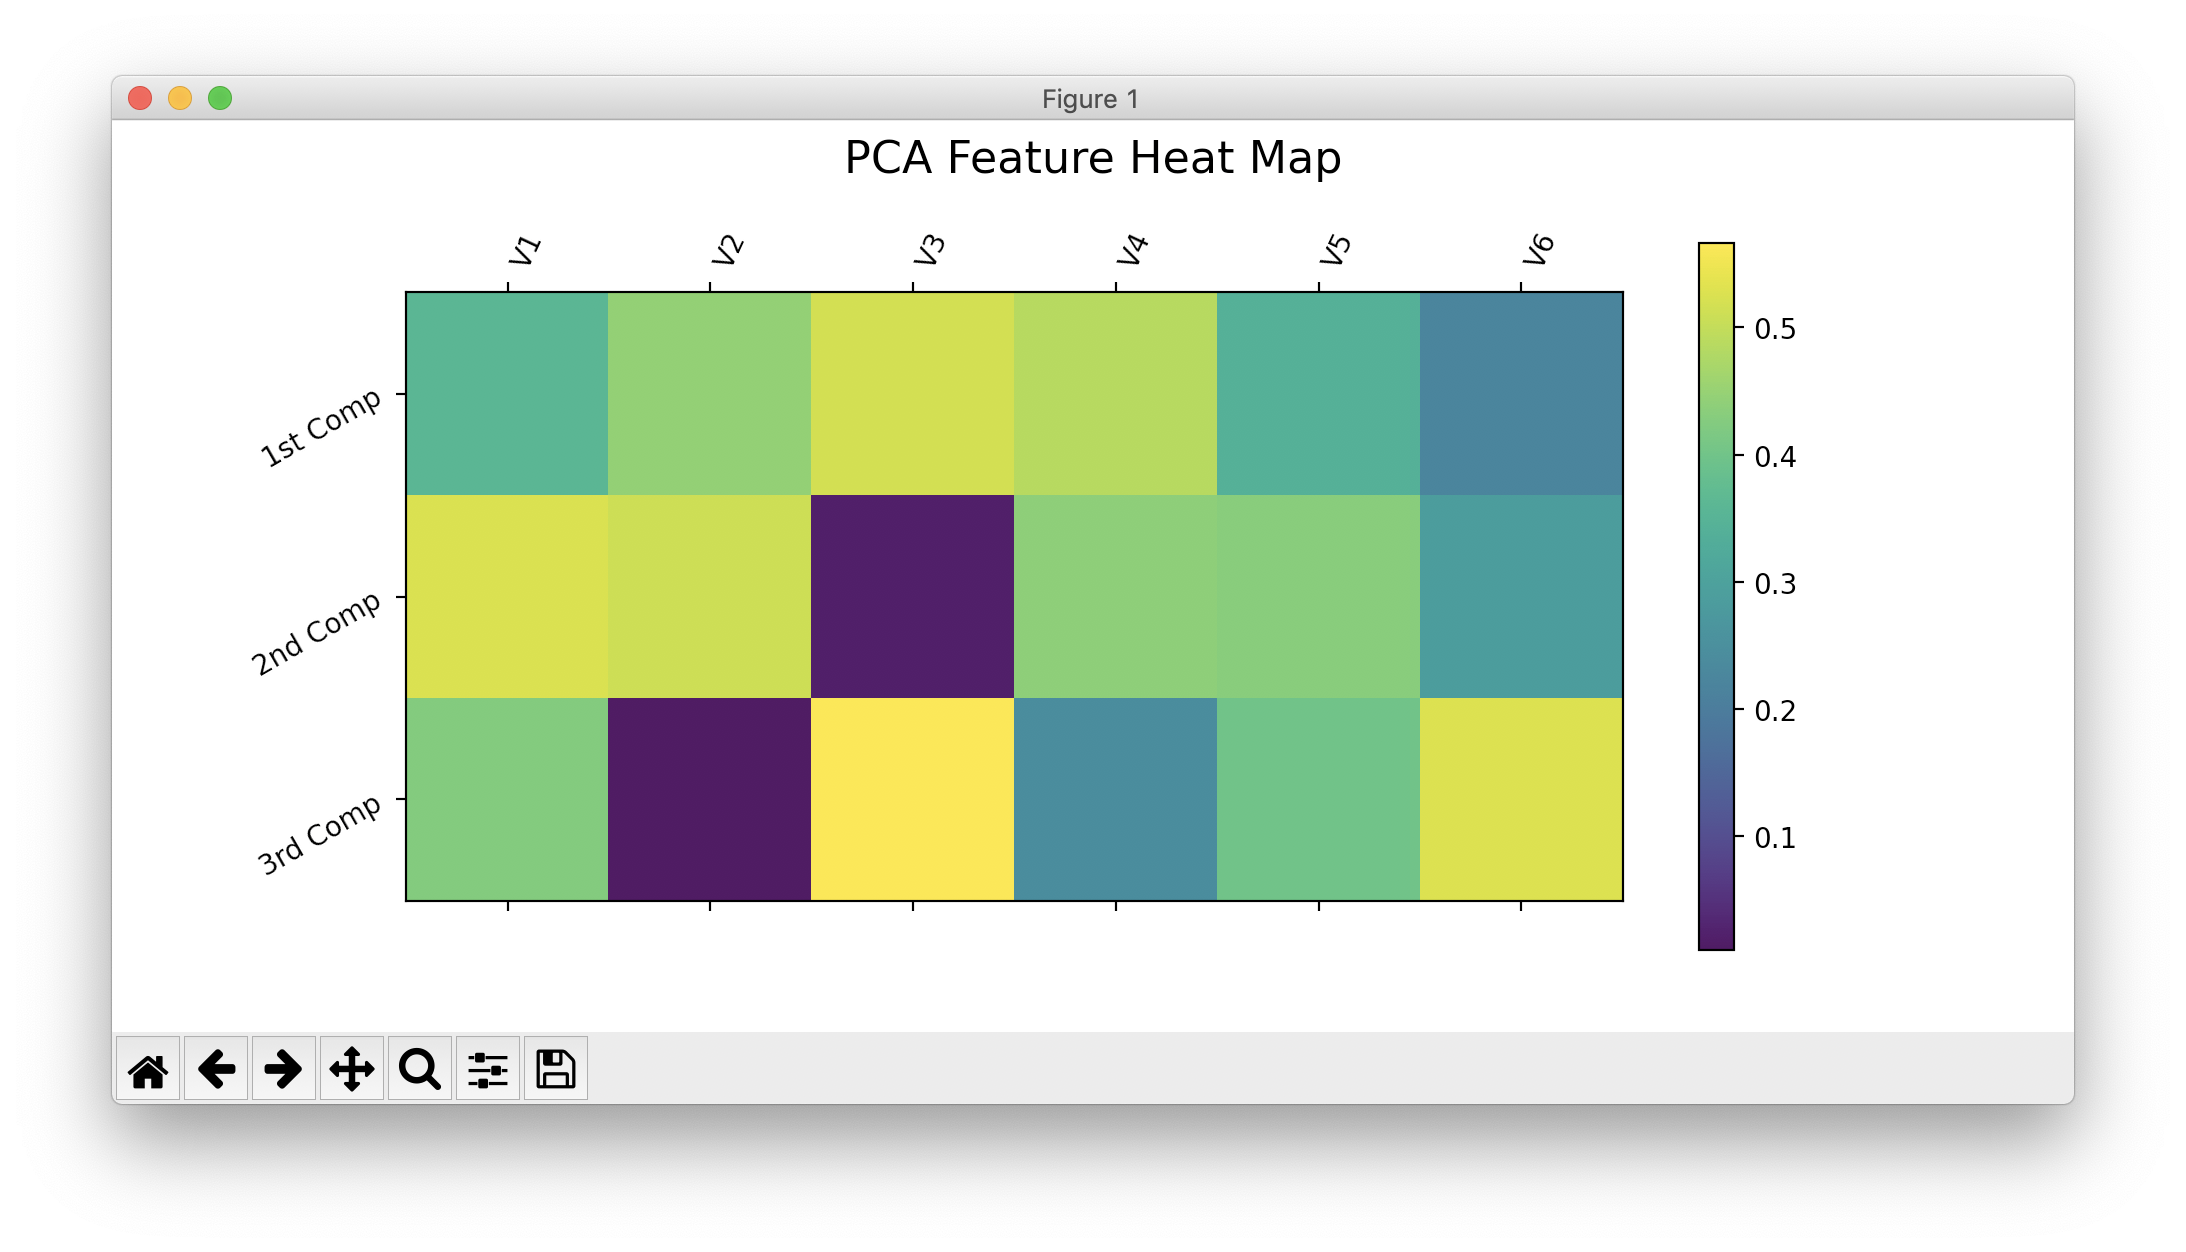 PCA Feature Heat Map